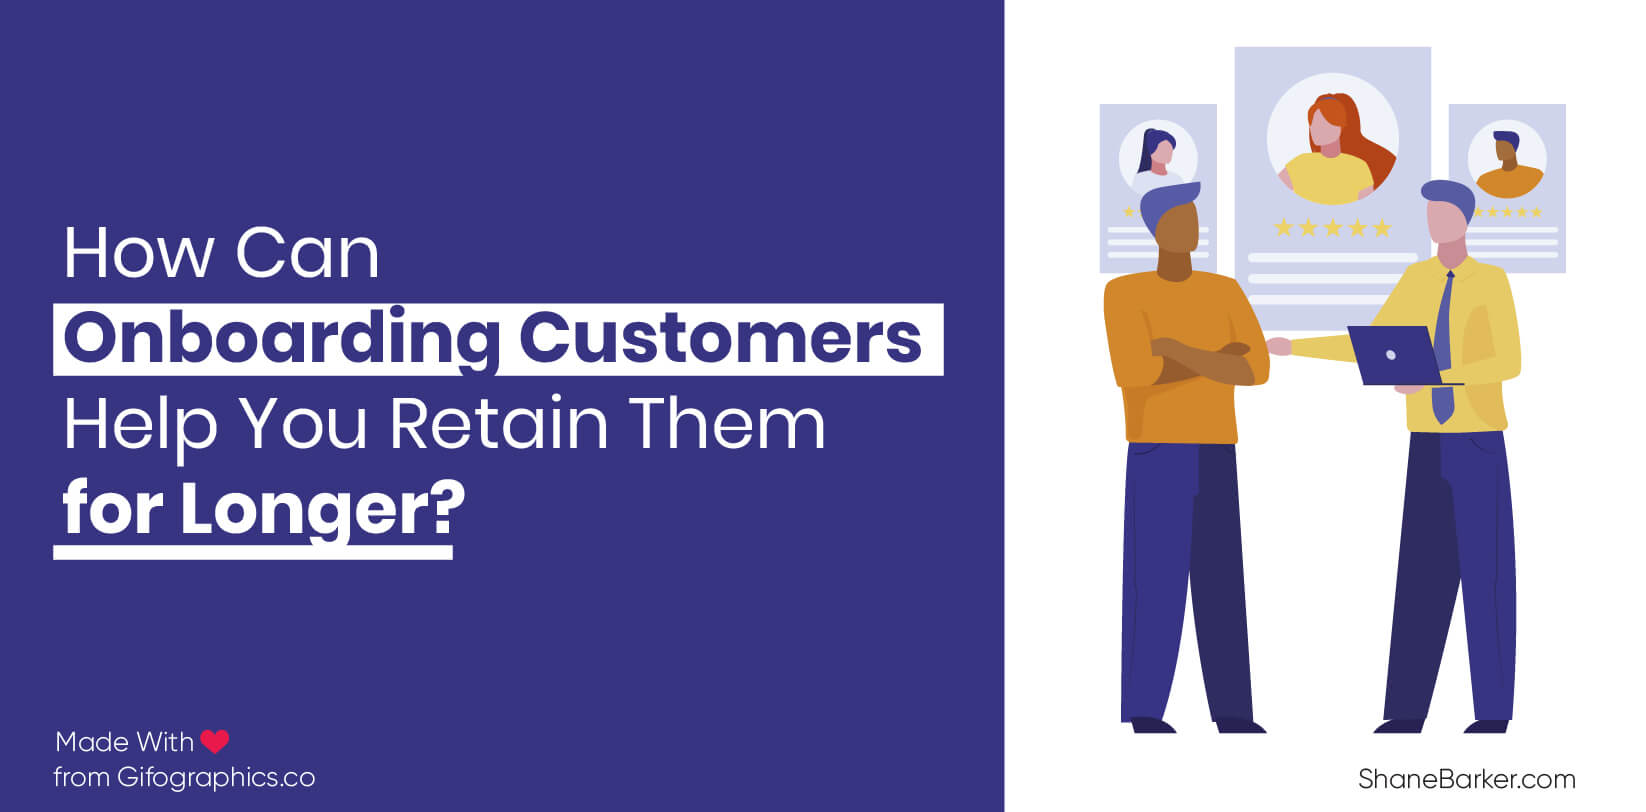 How Can Onboarding Customers Help You Retain Them for Longer